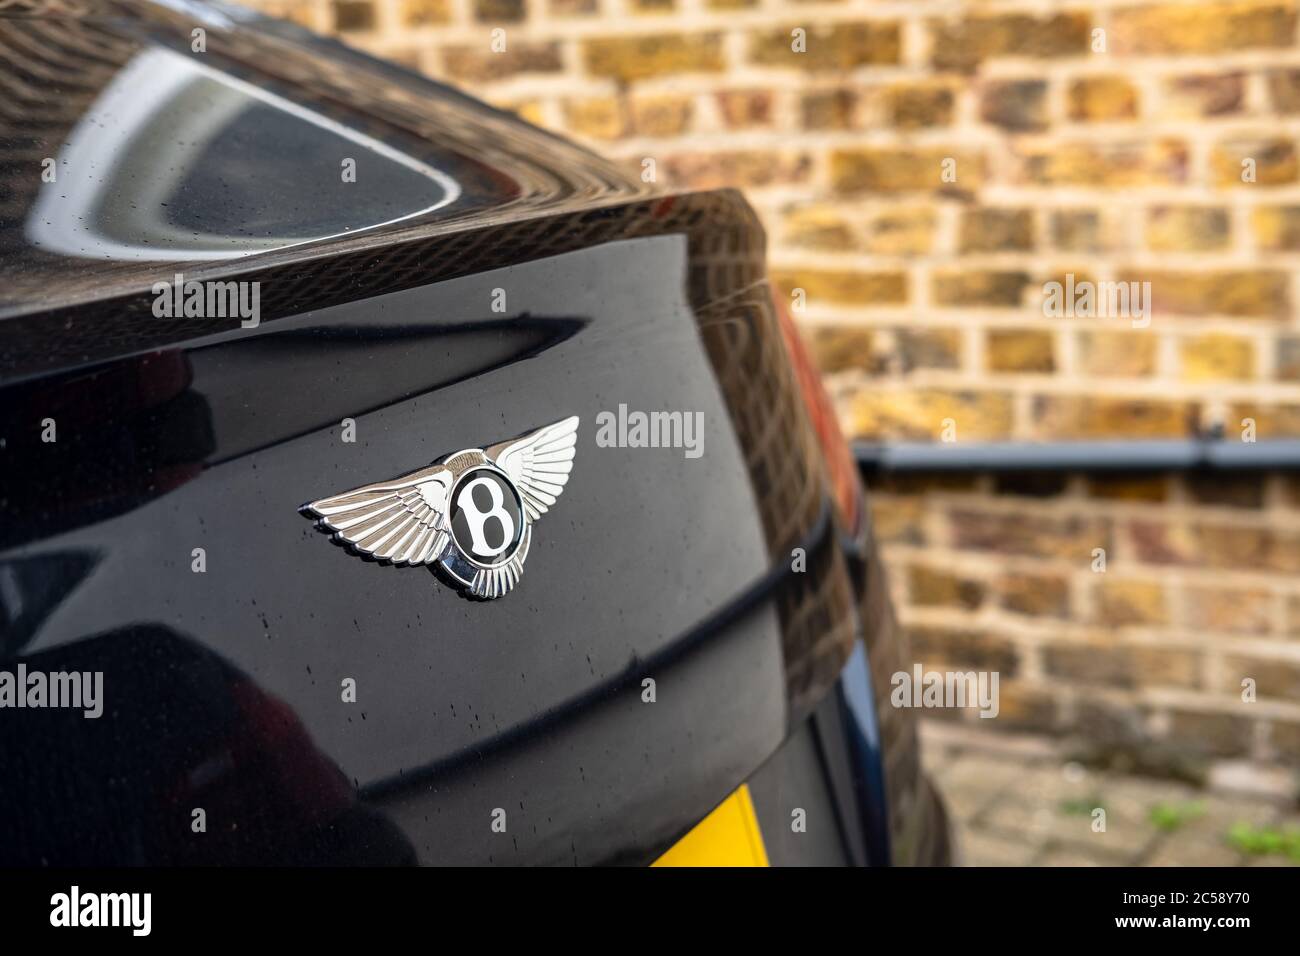 Shallow focus, isolated view of a famous, British made luxury car logo seen on the boot of a sports car. Located in a private carpark. Stock Photo